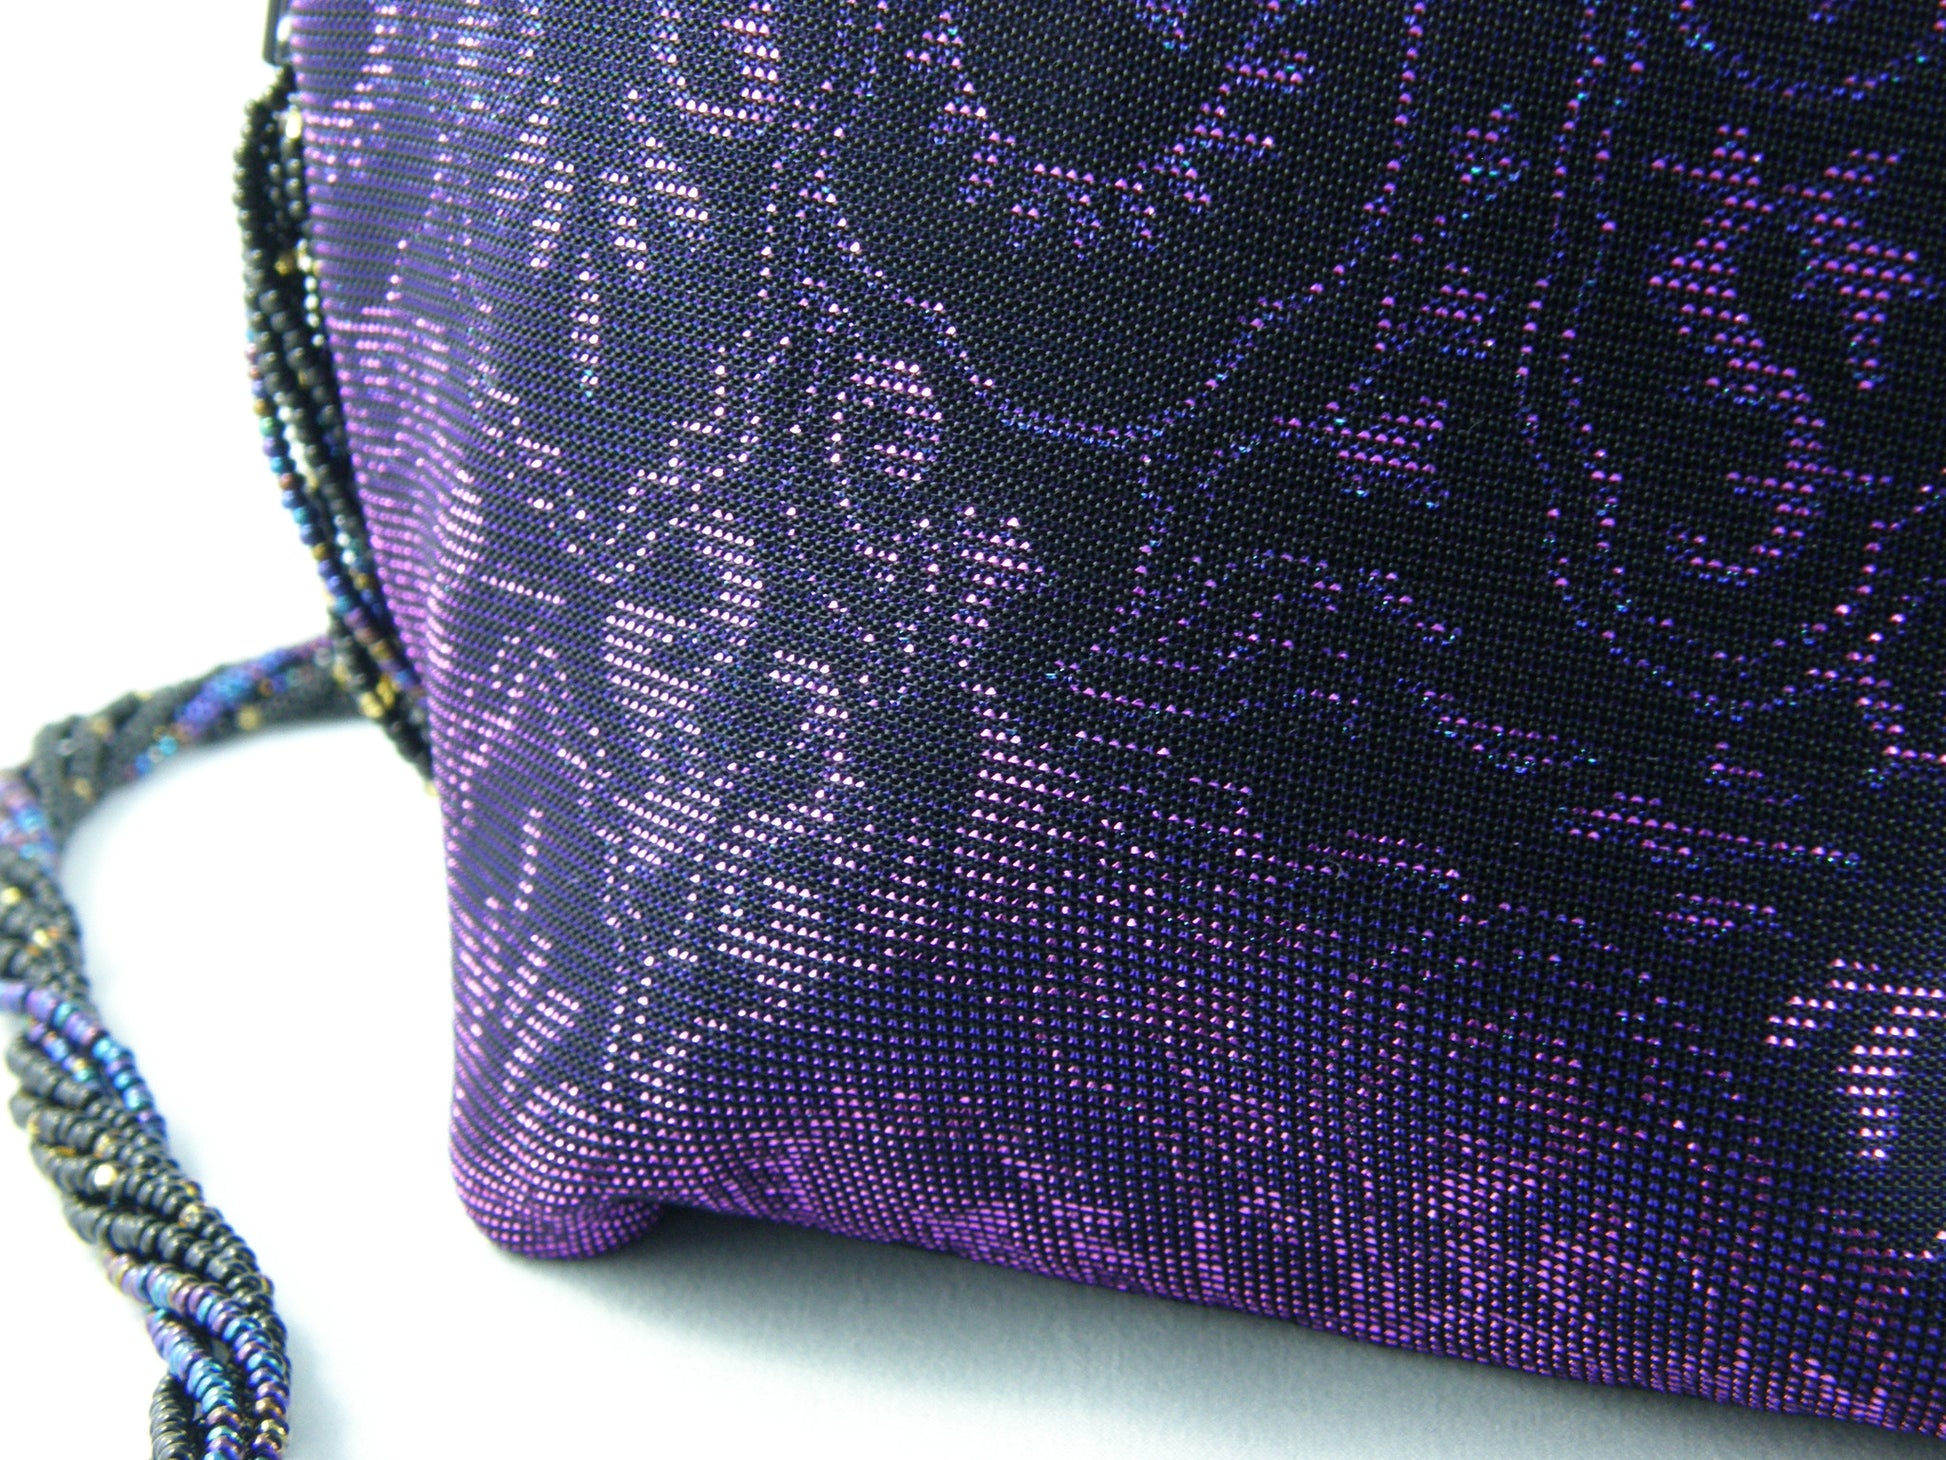 Iridescent Evening Bag from Jenny Jag-Wear Design. Image shows a close up to the iridescent fabric in hues of purple, black, and turquoise. Depending on what fabric clothing you wear, the purse fabric will off-set the outfit. If you wear black, pink, green, blue or purple, the  colour of the purse will look different based on the fabric it will complement. The Liza Collection by Jenny Jag-Wear Design.